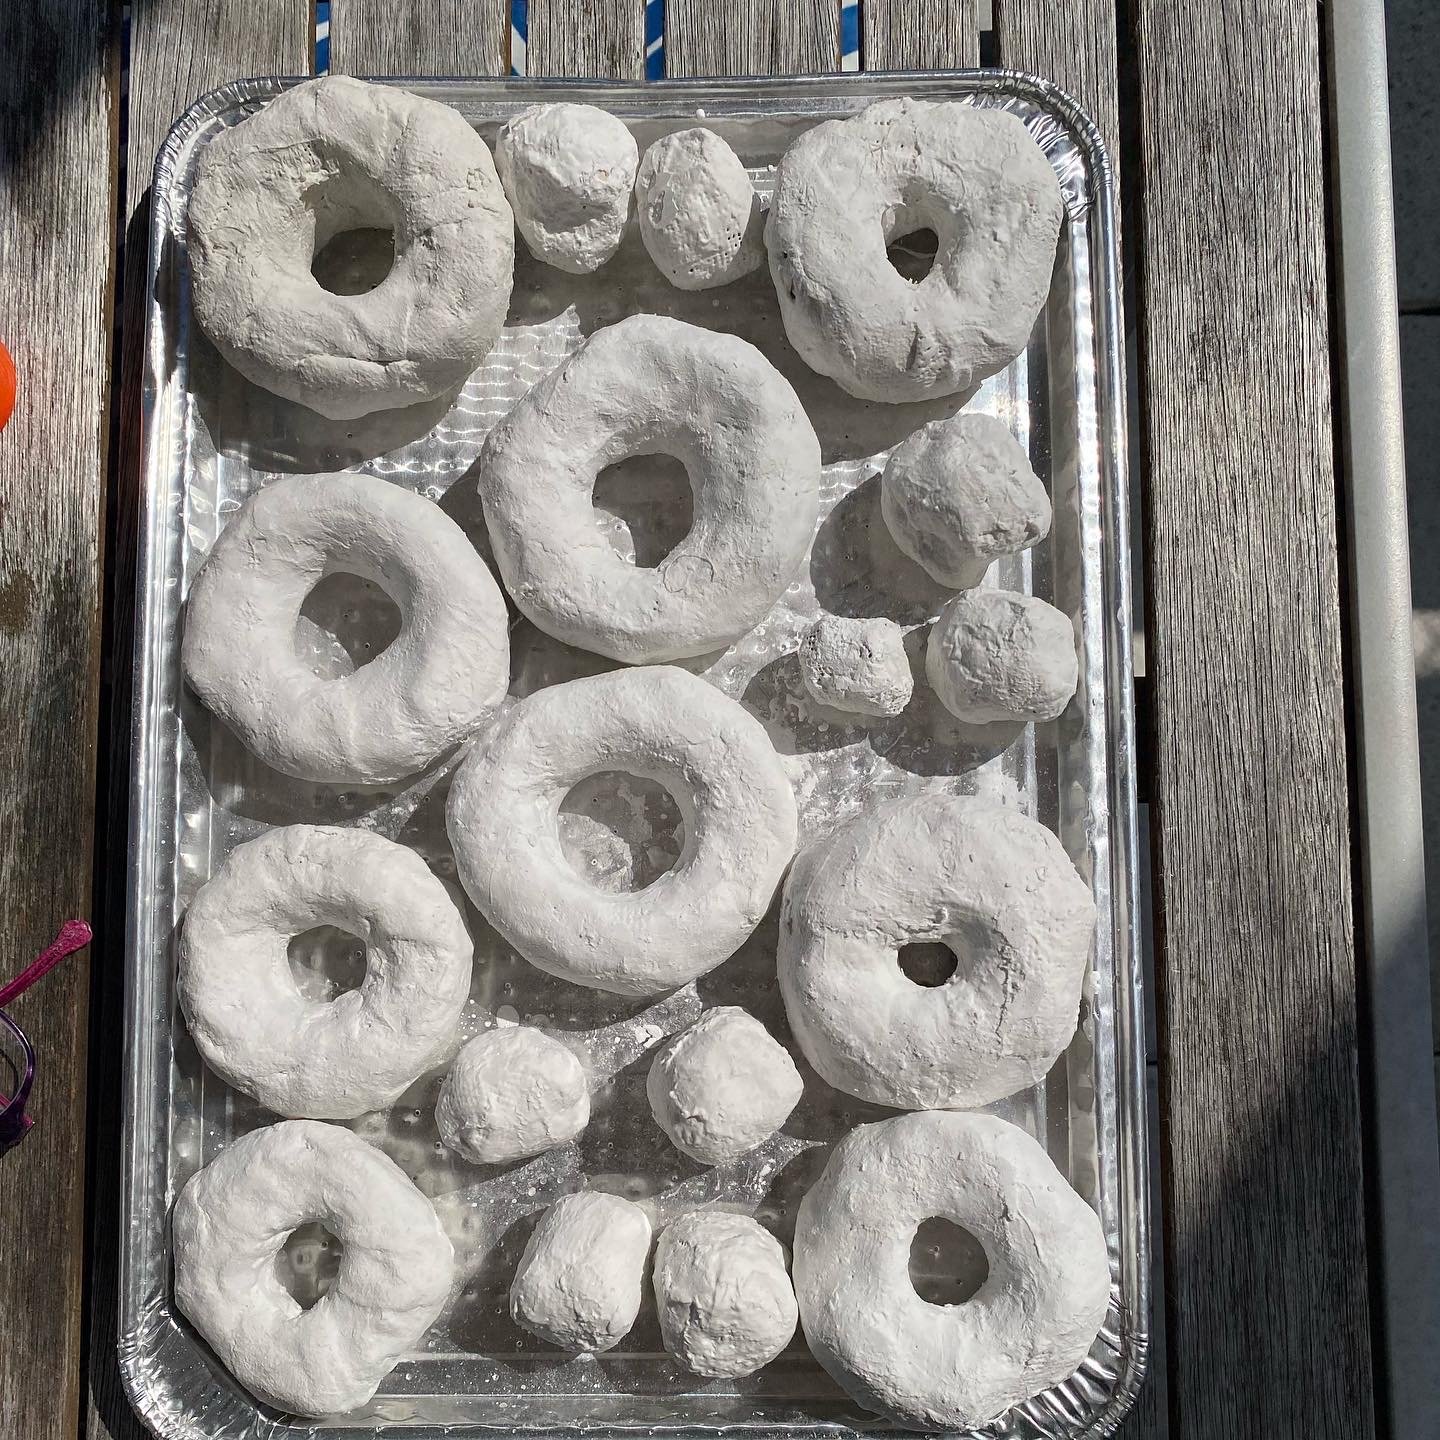 Plaster donuts made by class